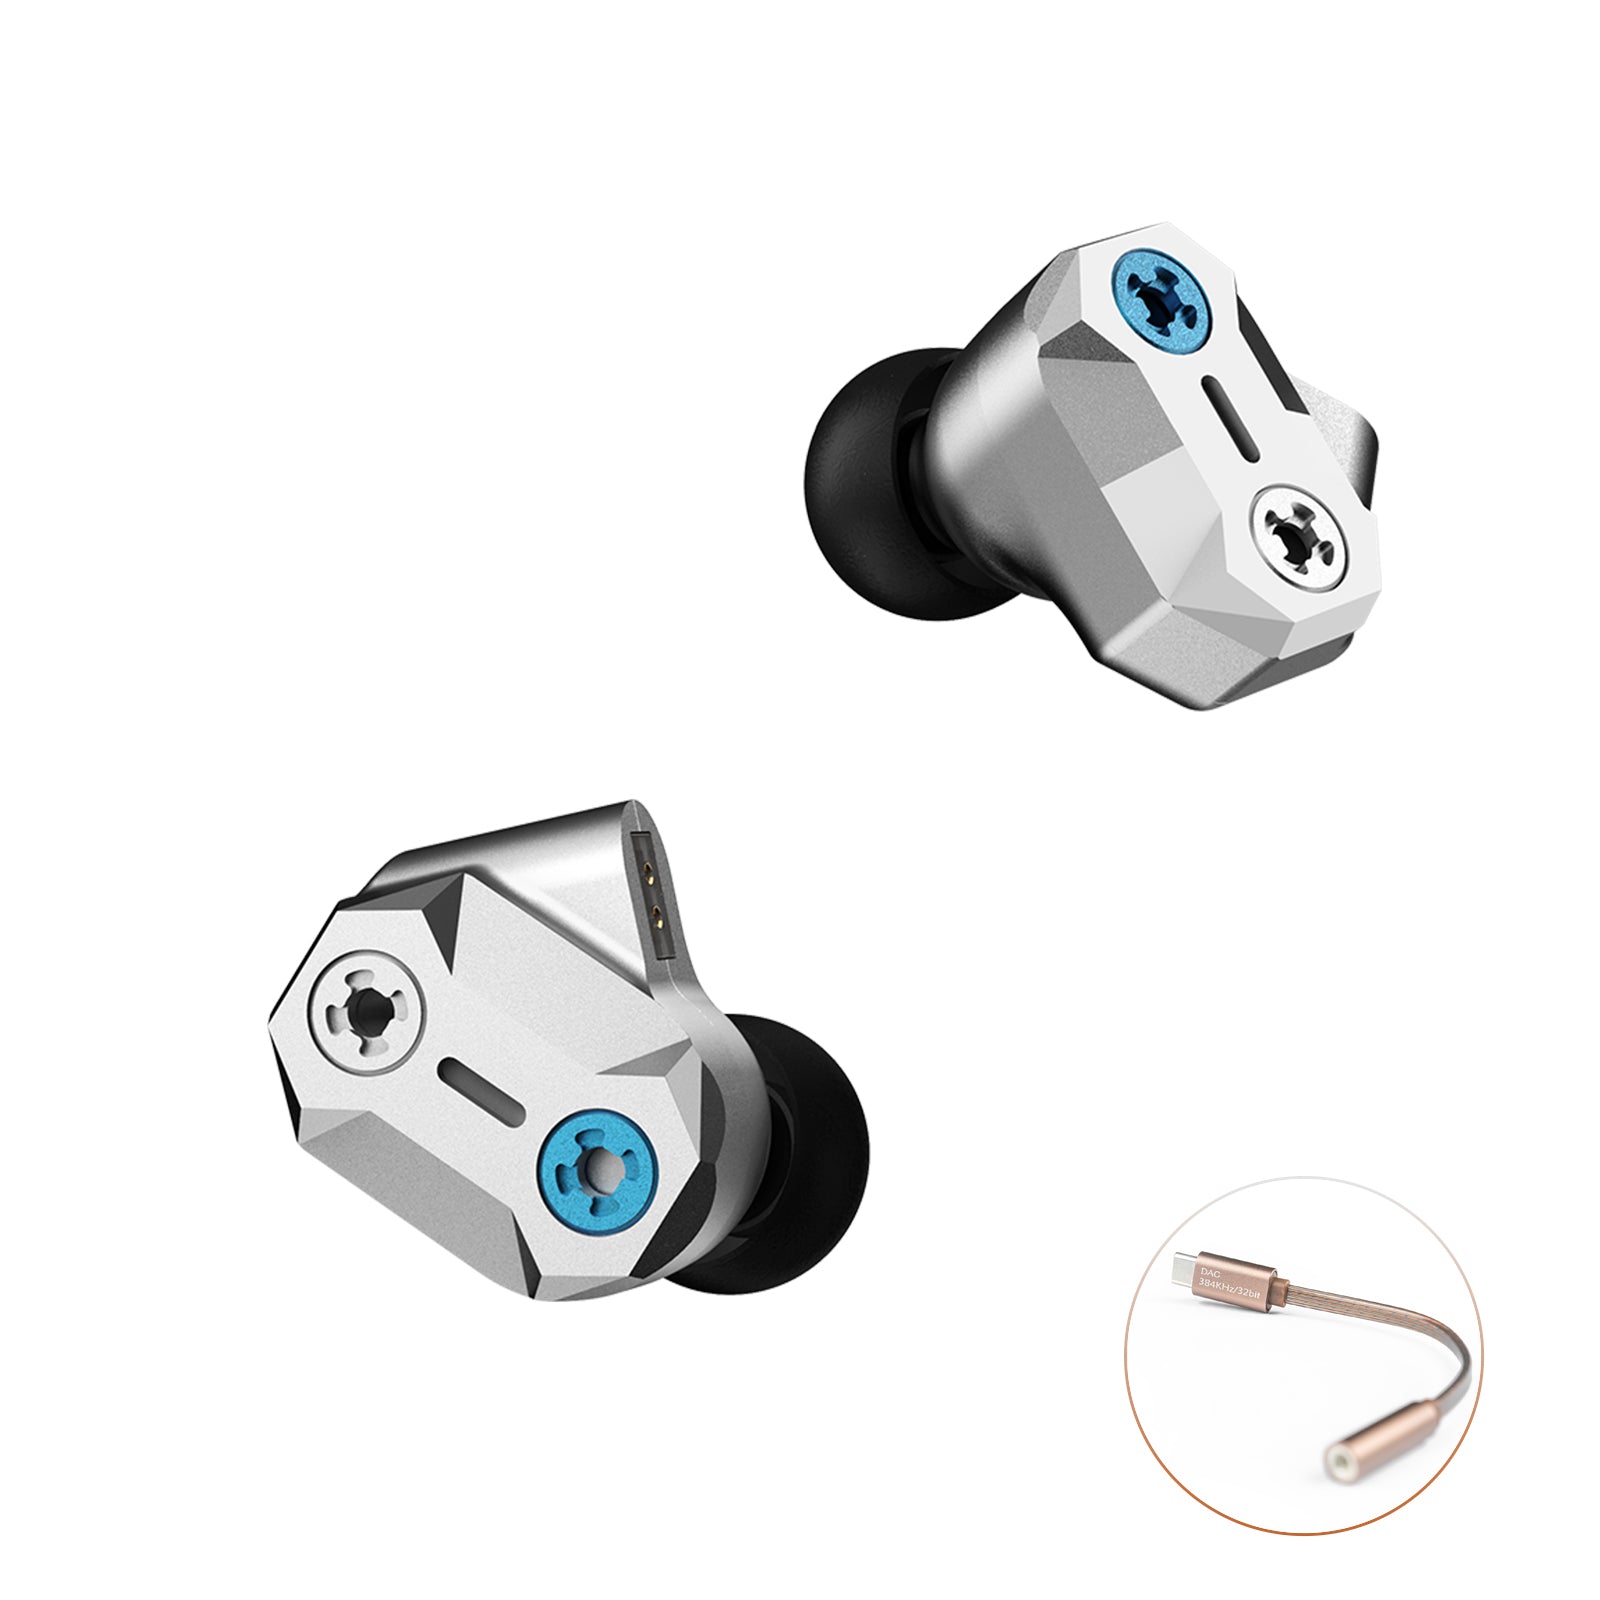 Tape Pro - In ear monitors created for heavy metal and rock enthusiasts